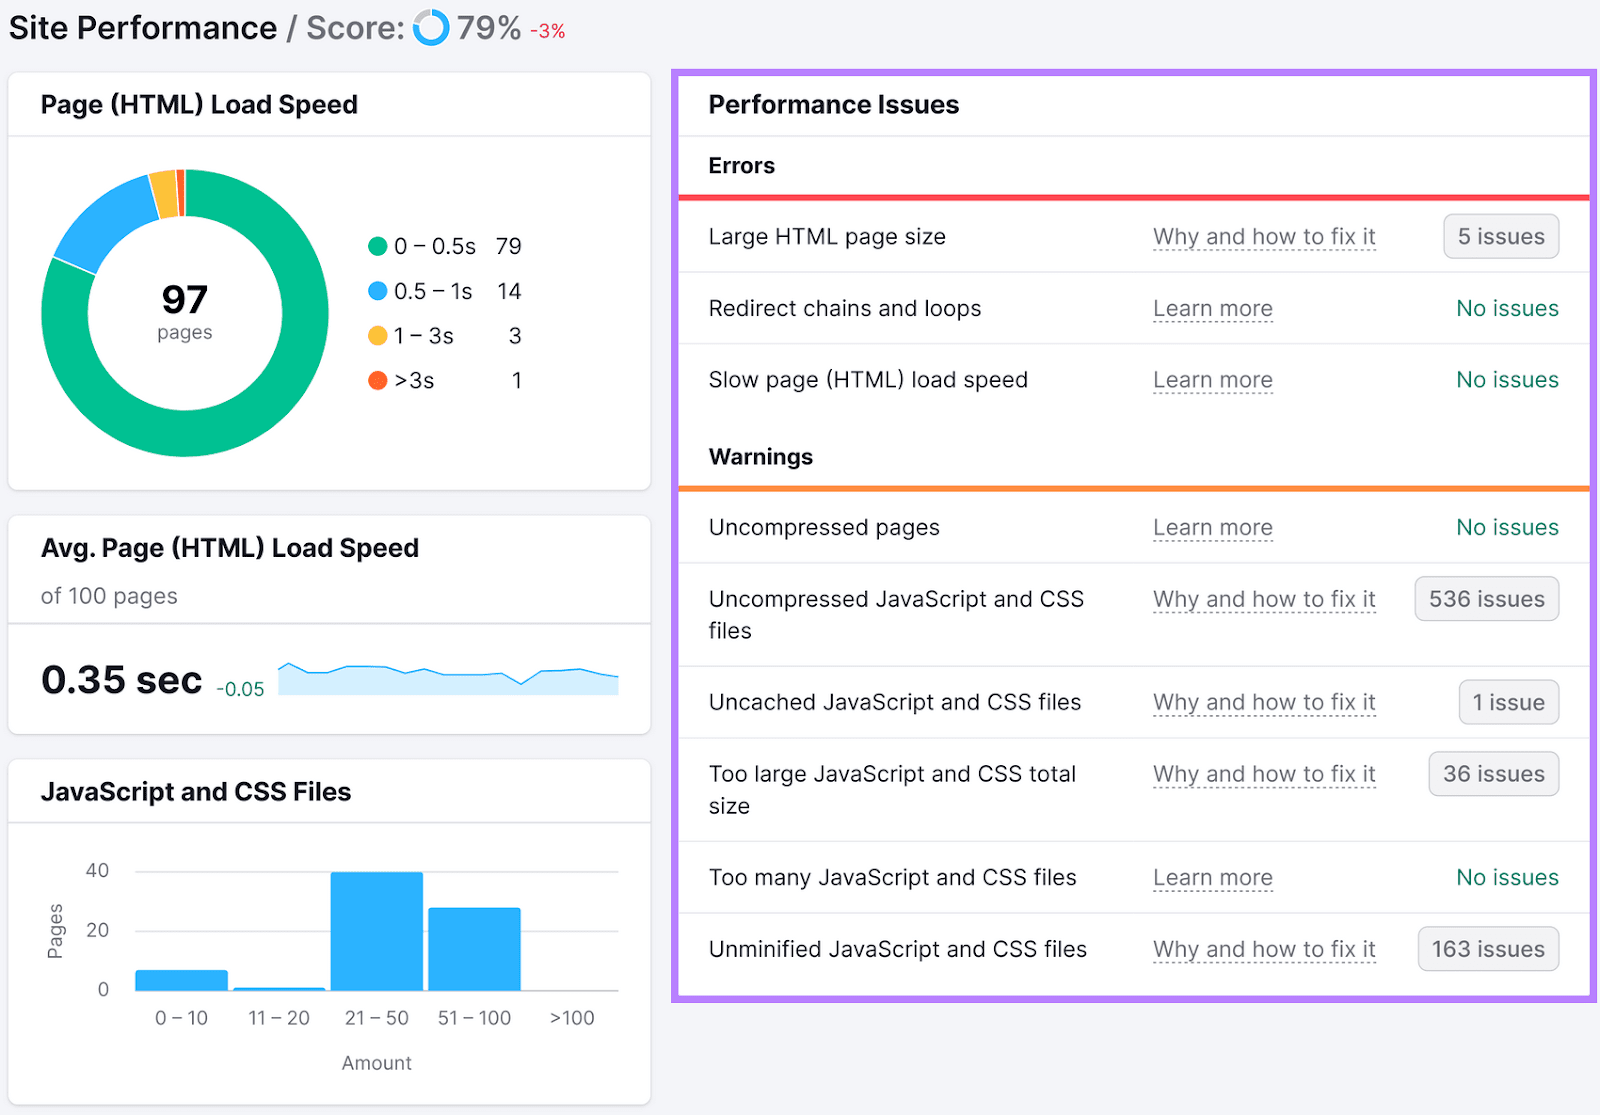 Site Performance analysis showing Site Performance analysis showing a score of 79%, along with a list of performance issues with error and warning categories.